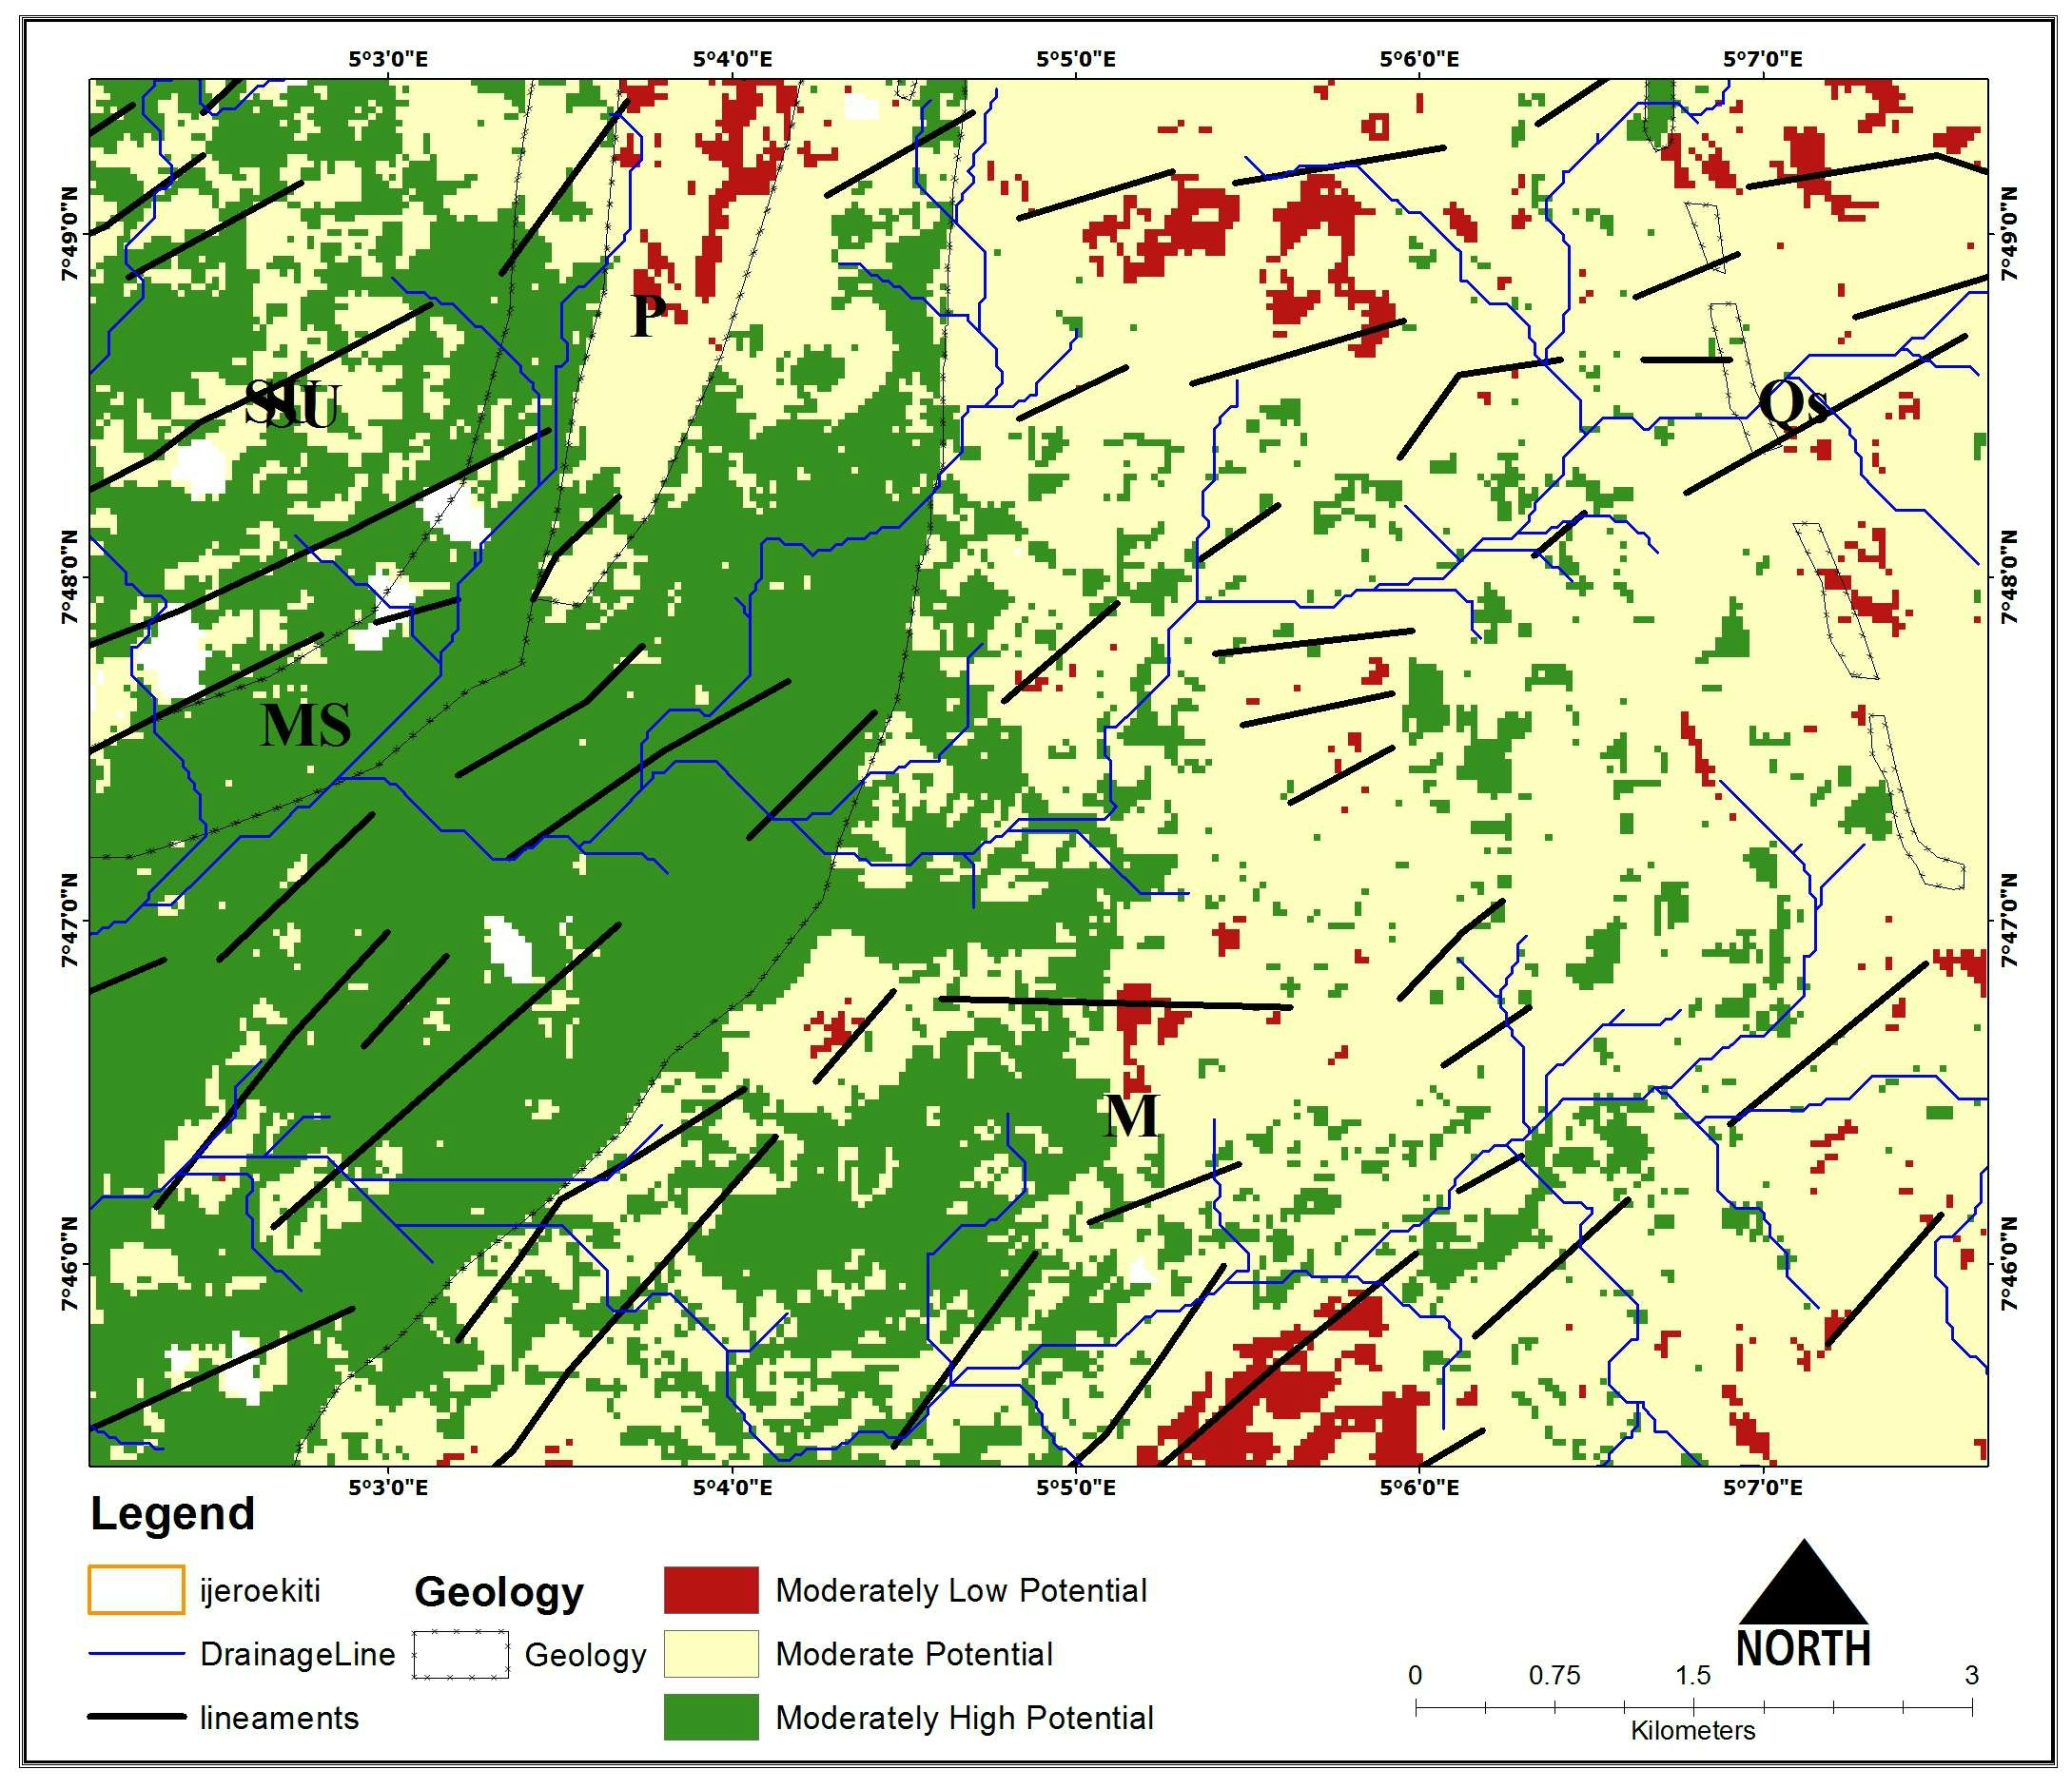 Groundwater Potential Modeling using AHP